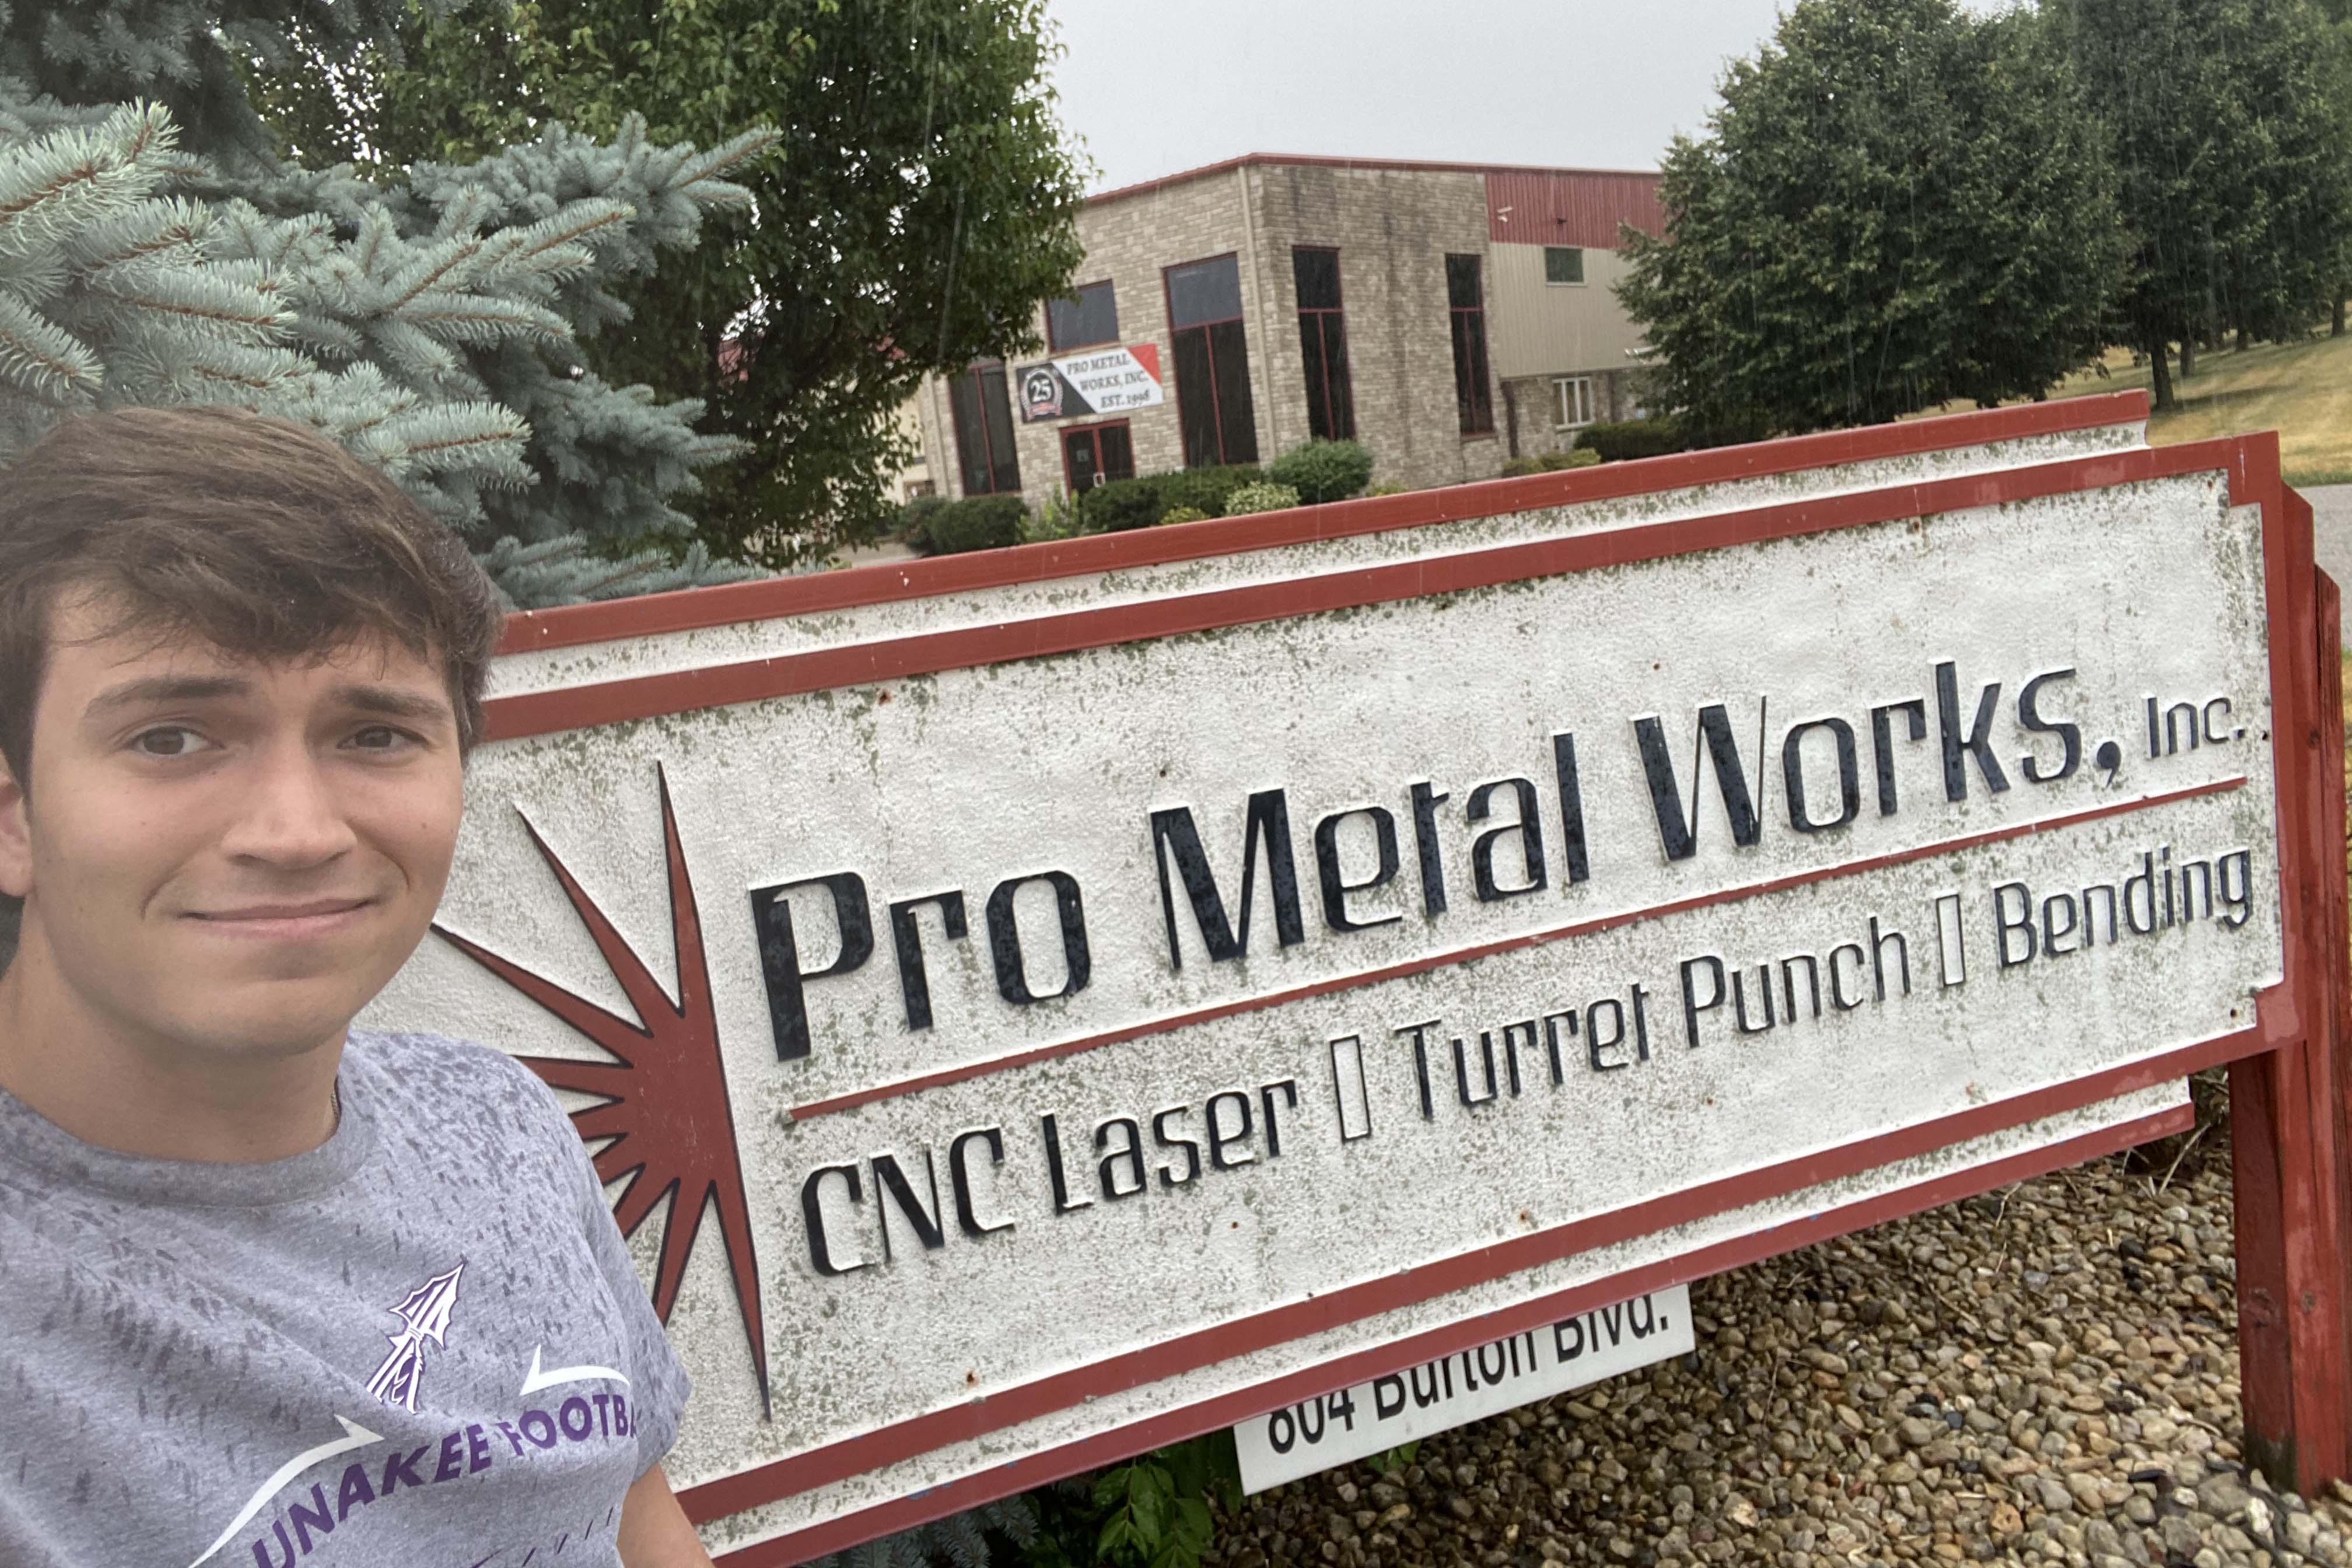 Connor Carroll taking a selfie outside in front of the Pro Metal sign.